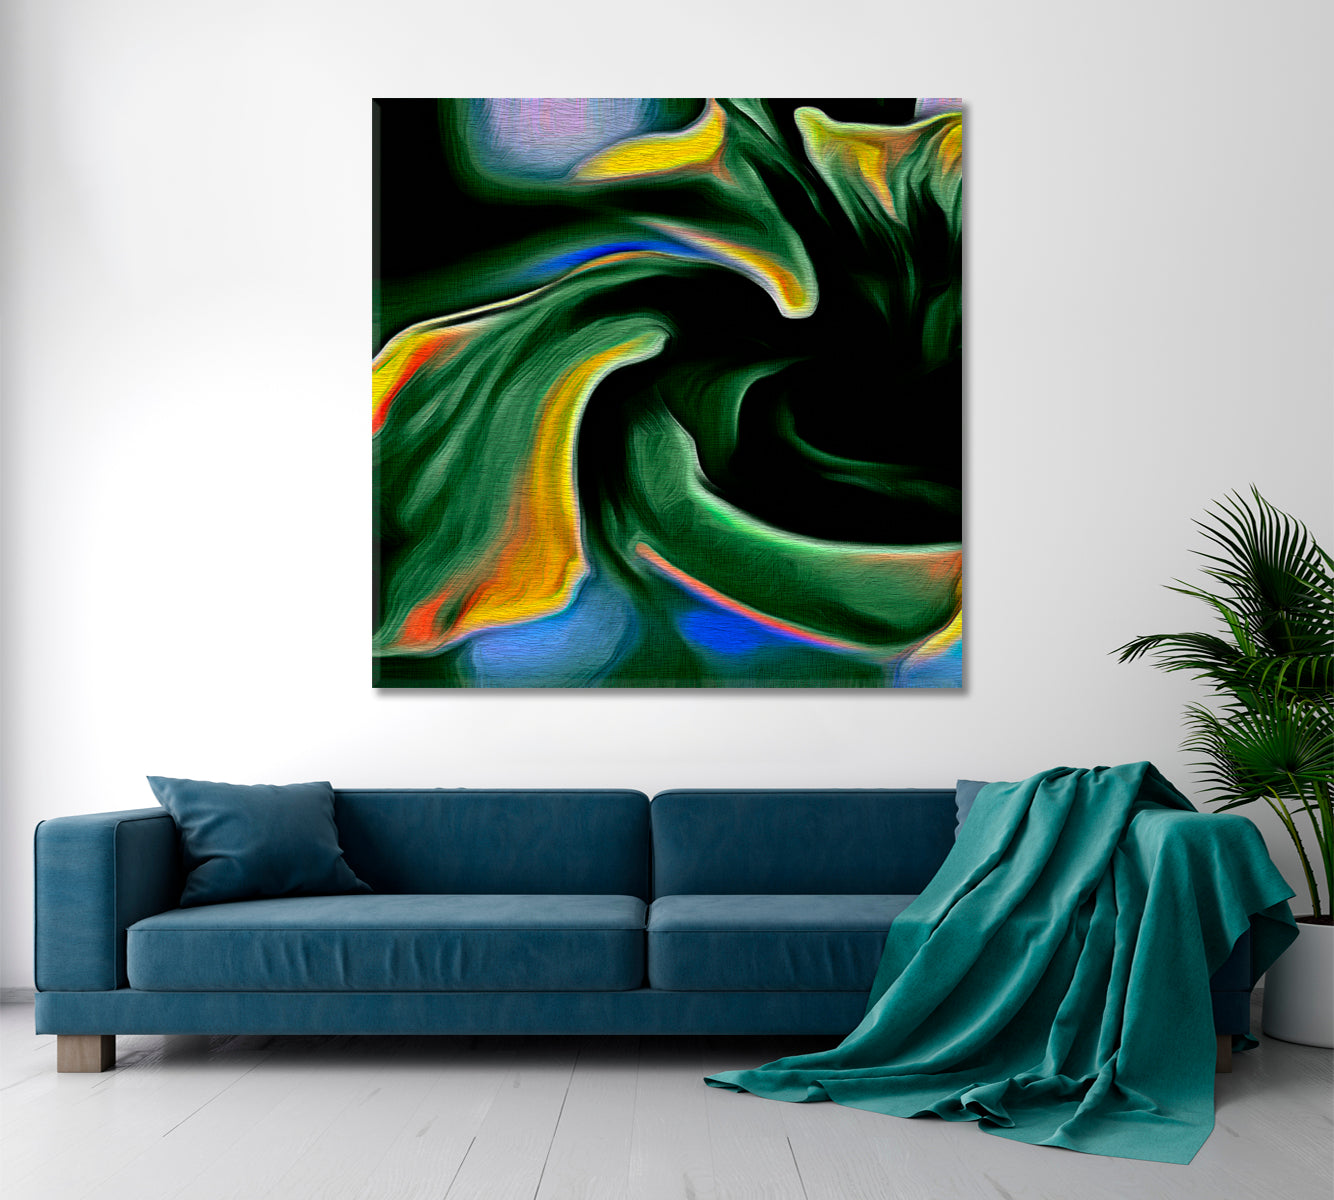 VIBRANT Green and Yellow Abstract Fractal Psychedelic Shape - Square Panel 2 Abstract Art Print Artesty 1 Panel 12"x12" 